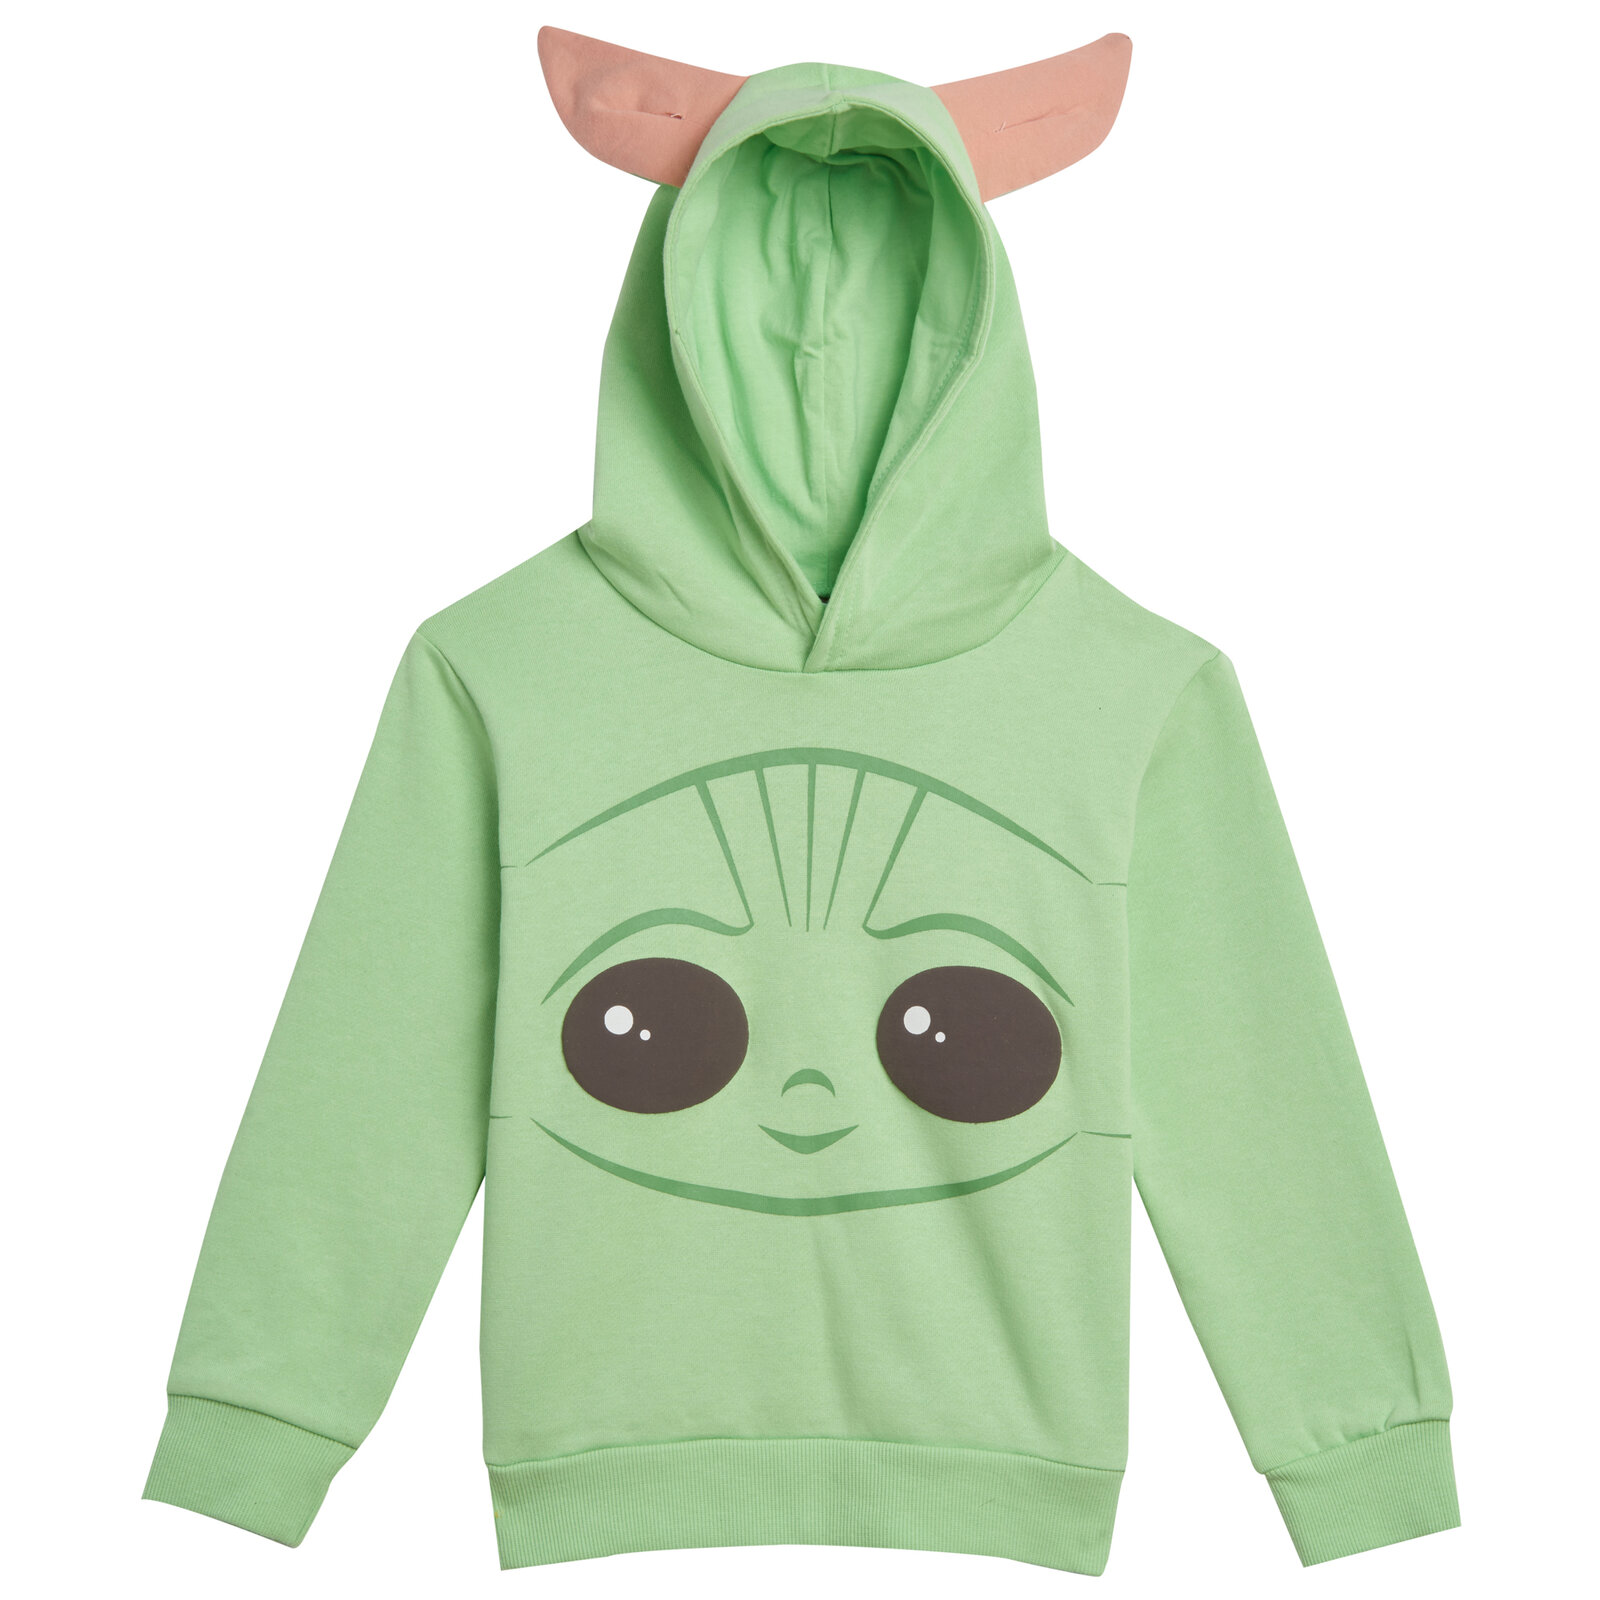 Star Wars Baby Yoda The Mandalorian Boy's Pullover Fleece Hoodie Fancy-Dress Costume for Toddler, 4T - image 2 of 5